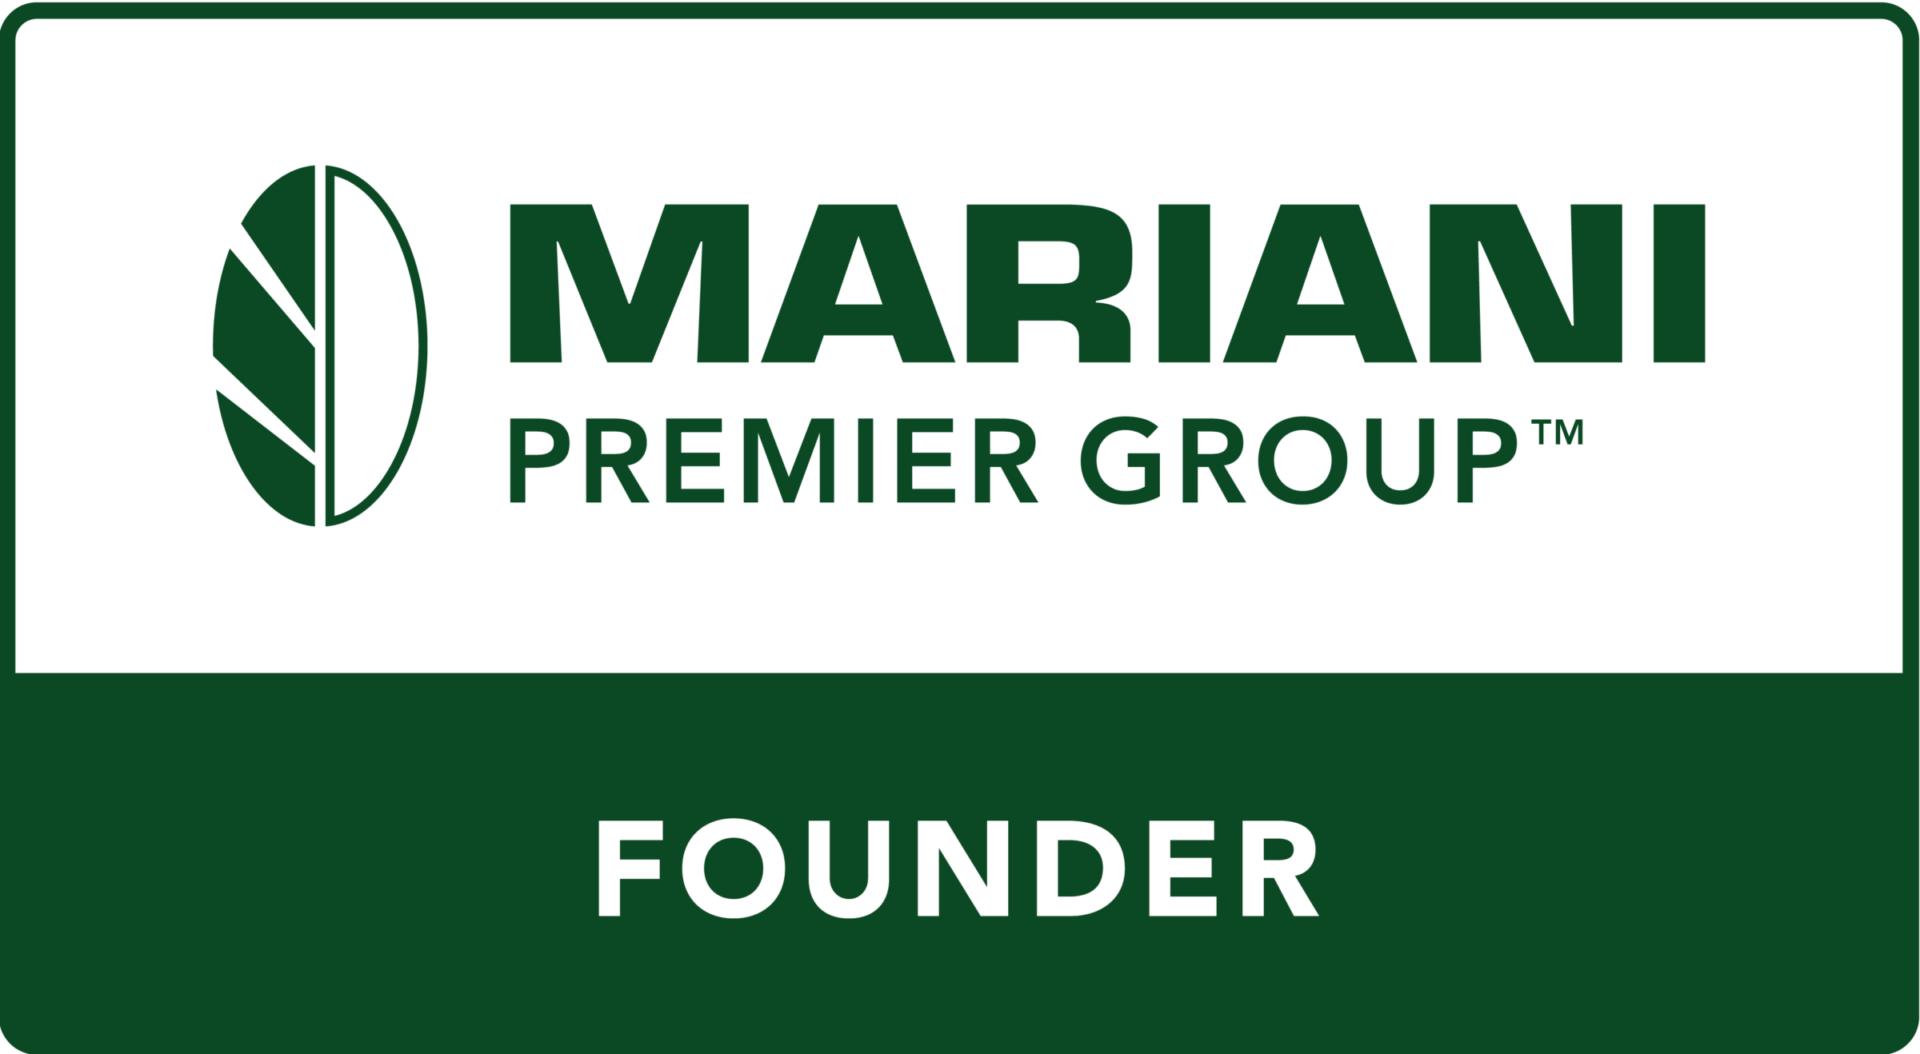 The image displays a logo for "MARIANI PREMIER GROUP" with a leaf motif and the word "FOUNDER" beneath it, all set against a green background.